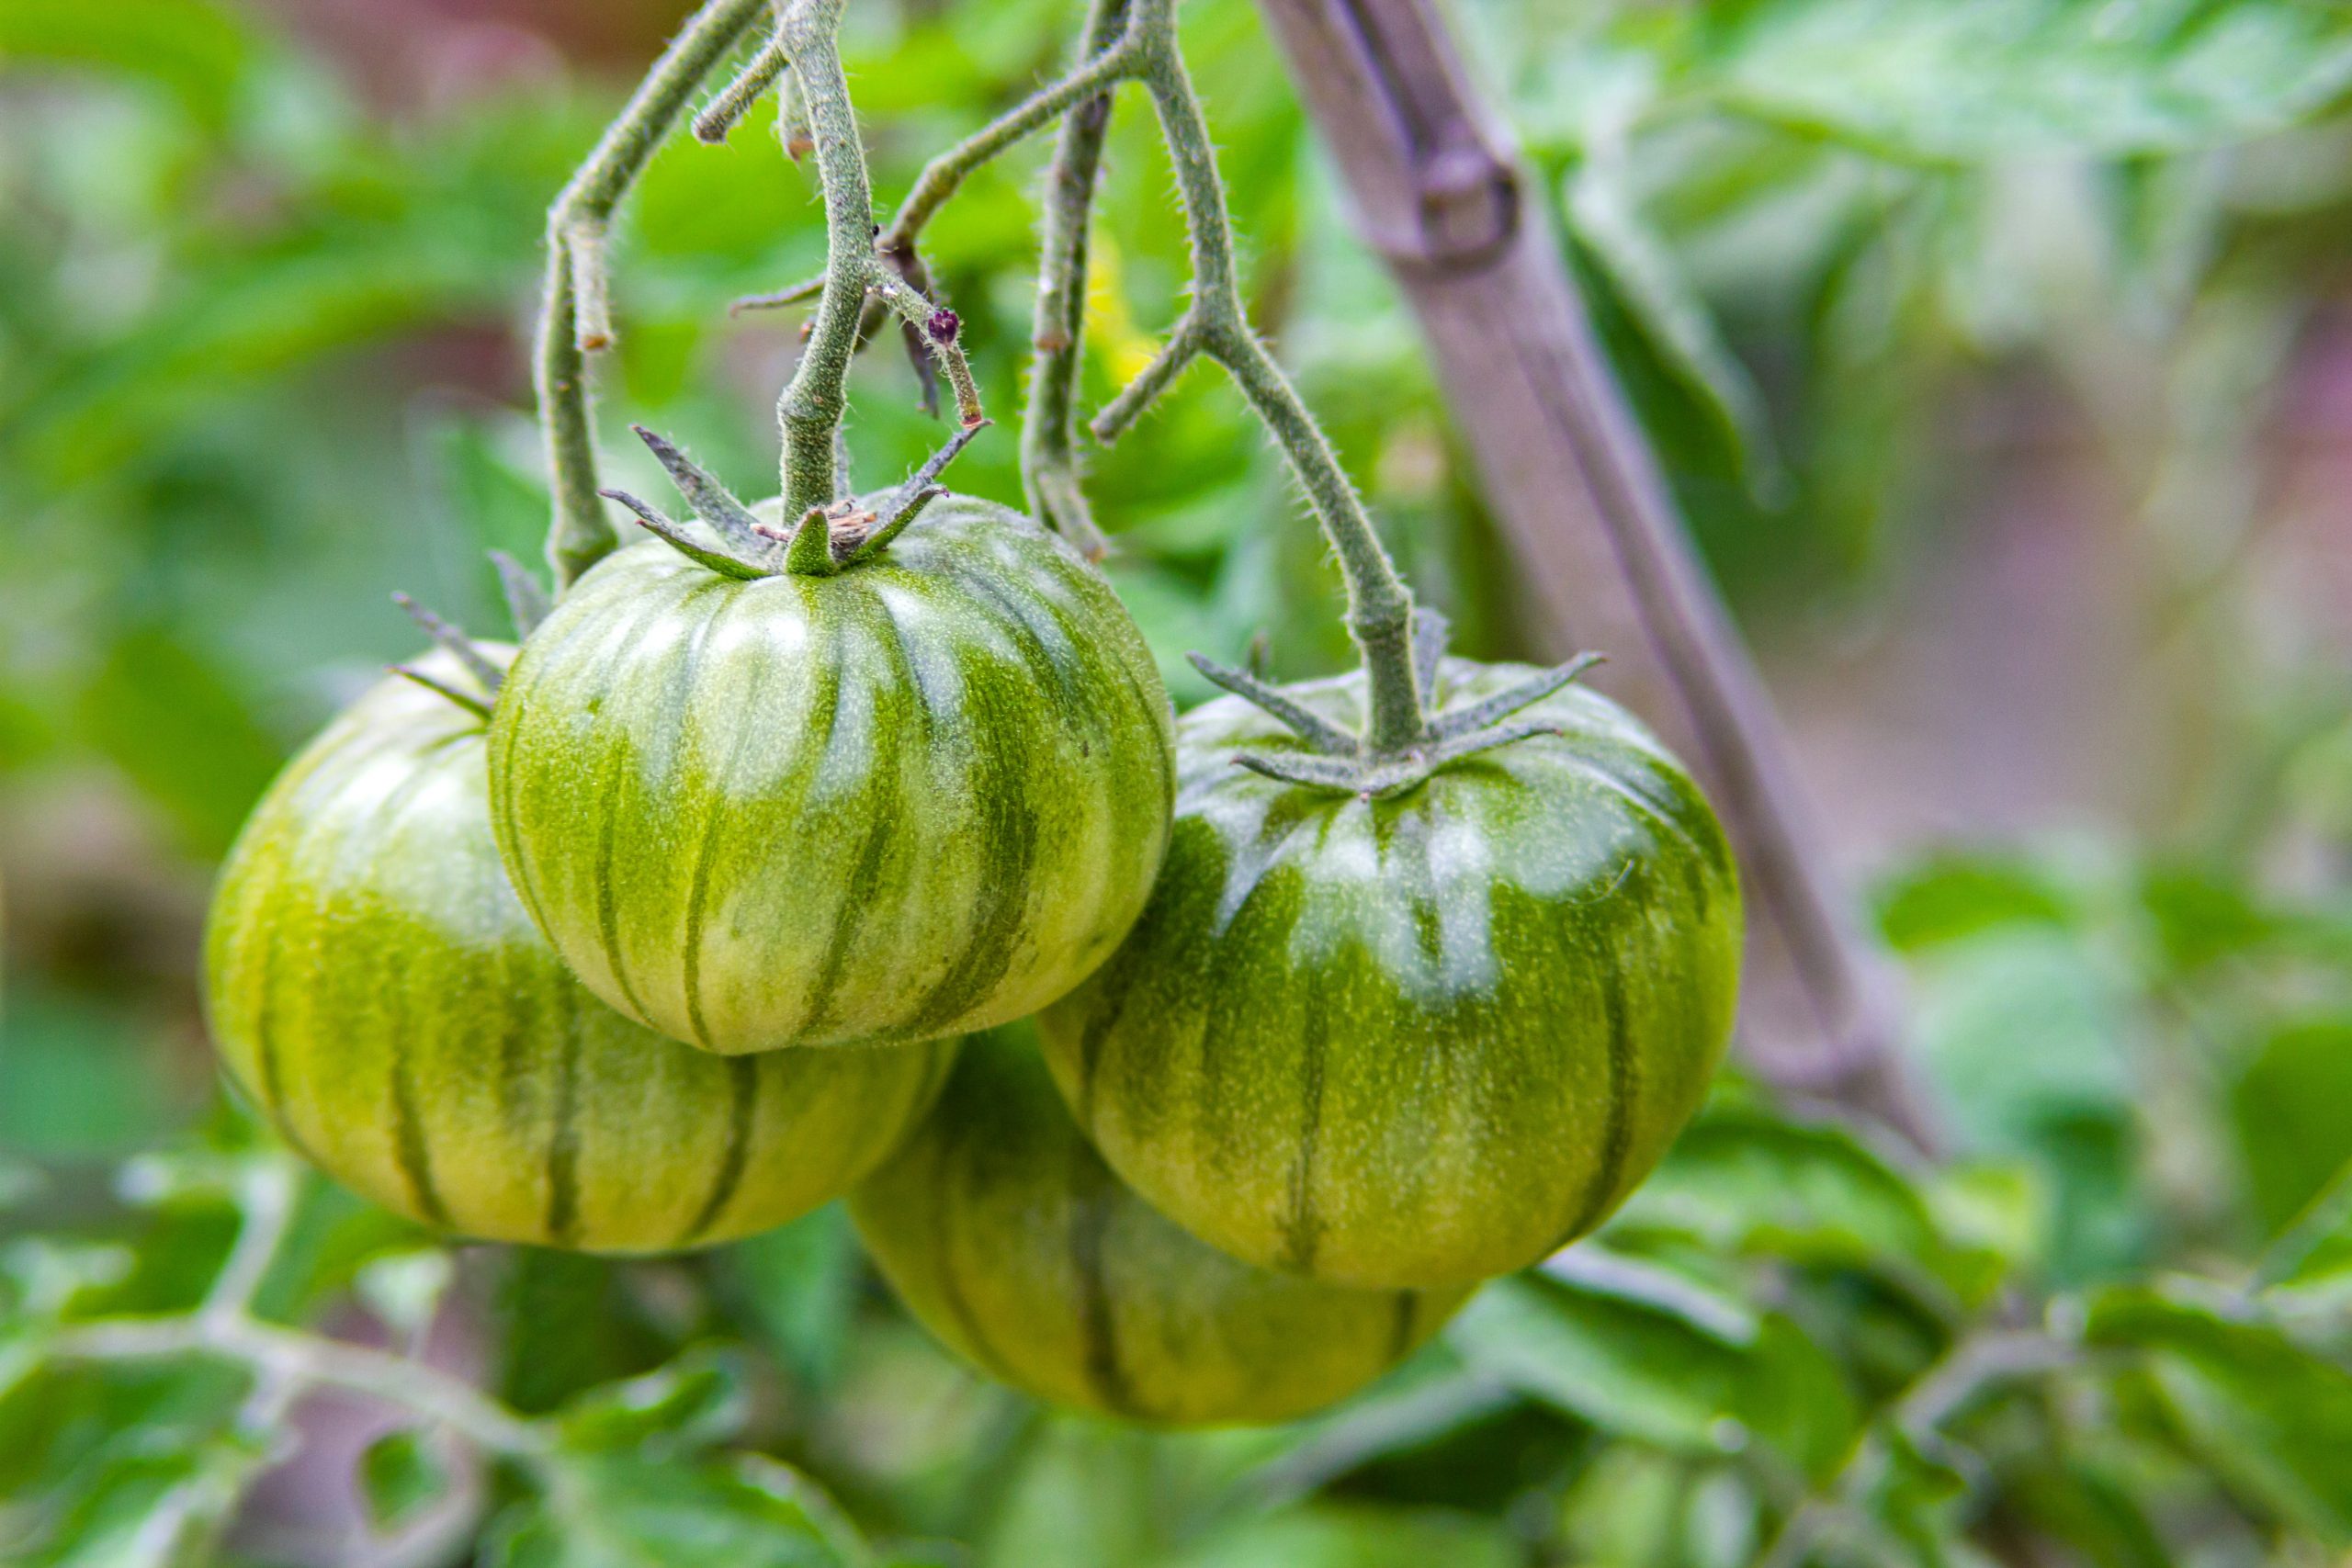 Can Chickens Eat Green Tomatoes? Is It Safe?